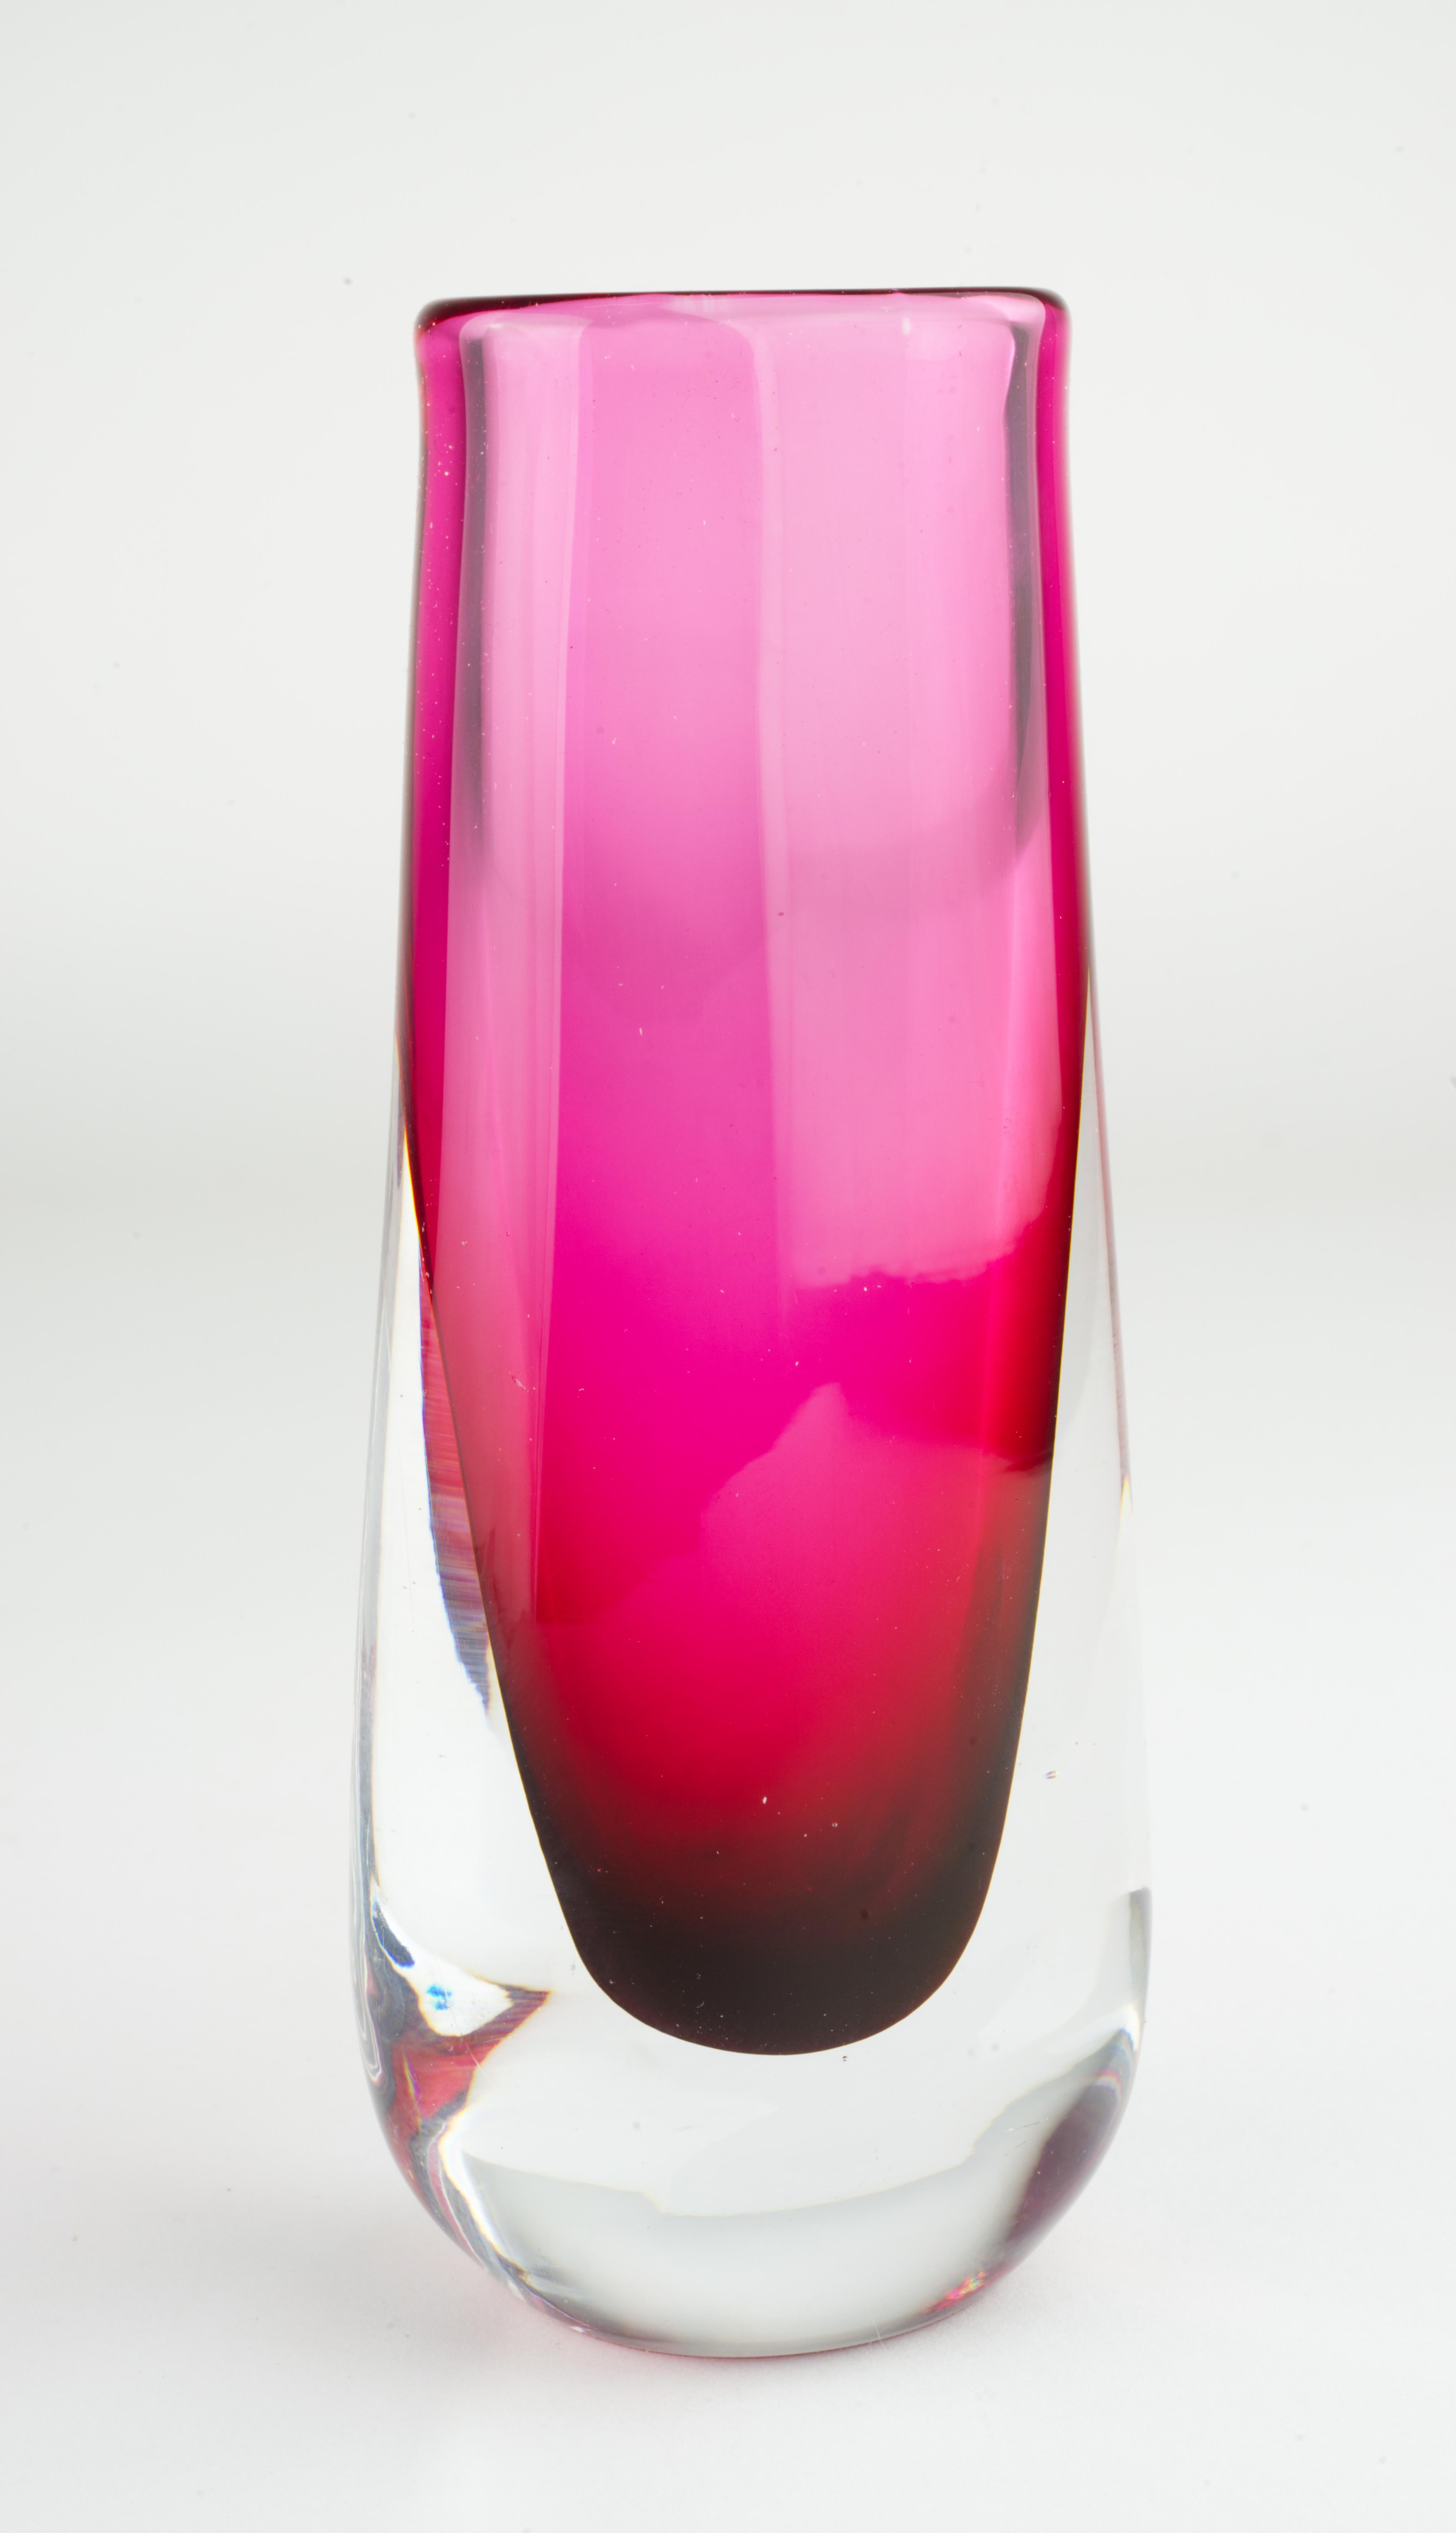  Scandinavian Mid Century Modern art glass bud vase is made in sommerso technique with cranberry red top and clear glass bottom. The vase is a part of the series designed by Josef Schott (1915 - 2009) for Smalandshyttan glassworks, that operated in